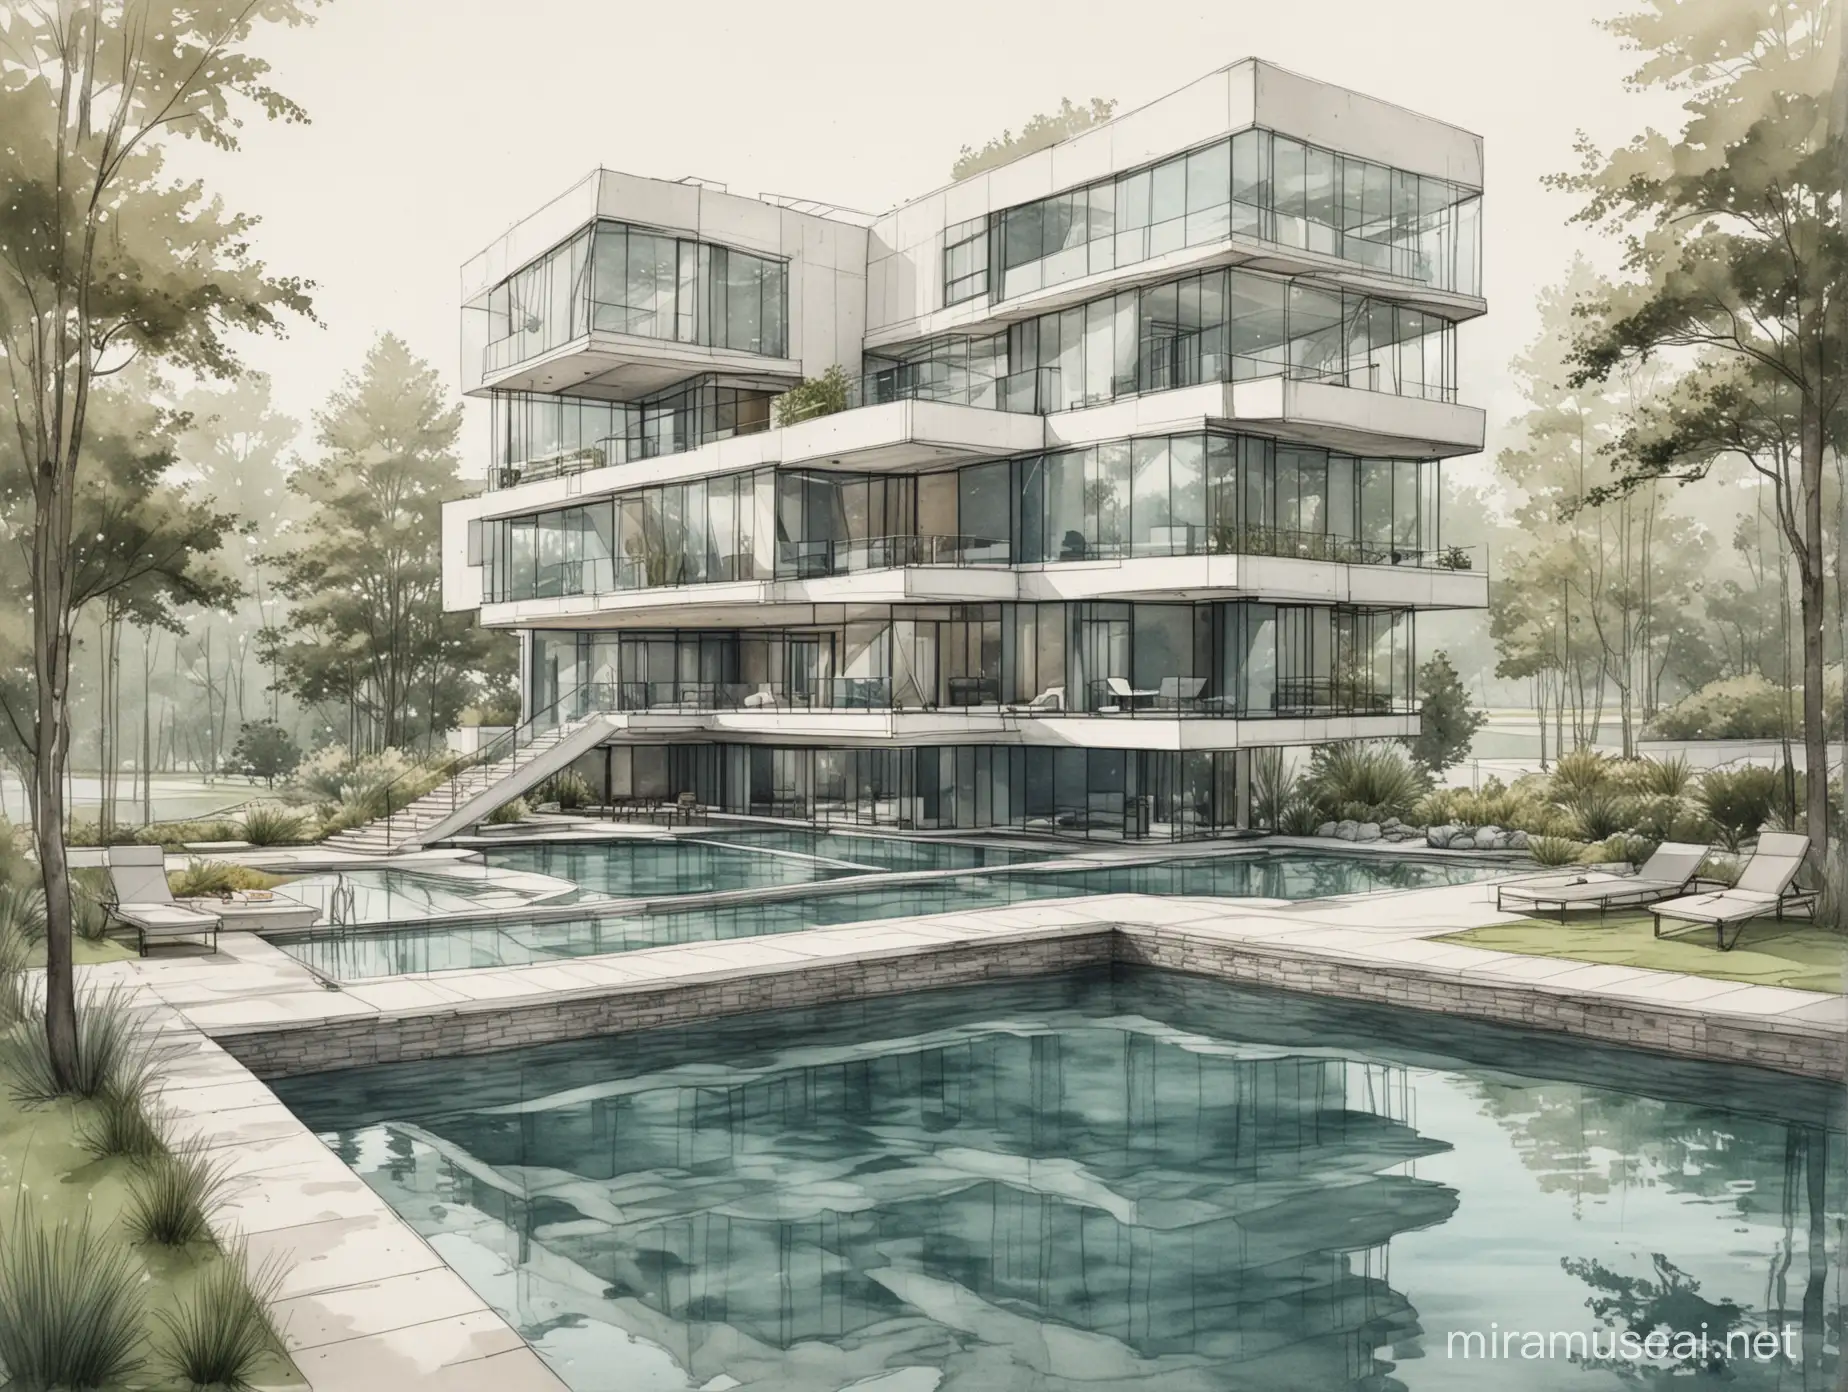 Modern FourStory Building with Integrated Outdoor Pond and Indoor Pool Featuring Geometric Shapes